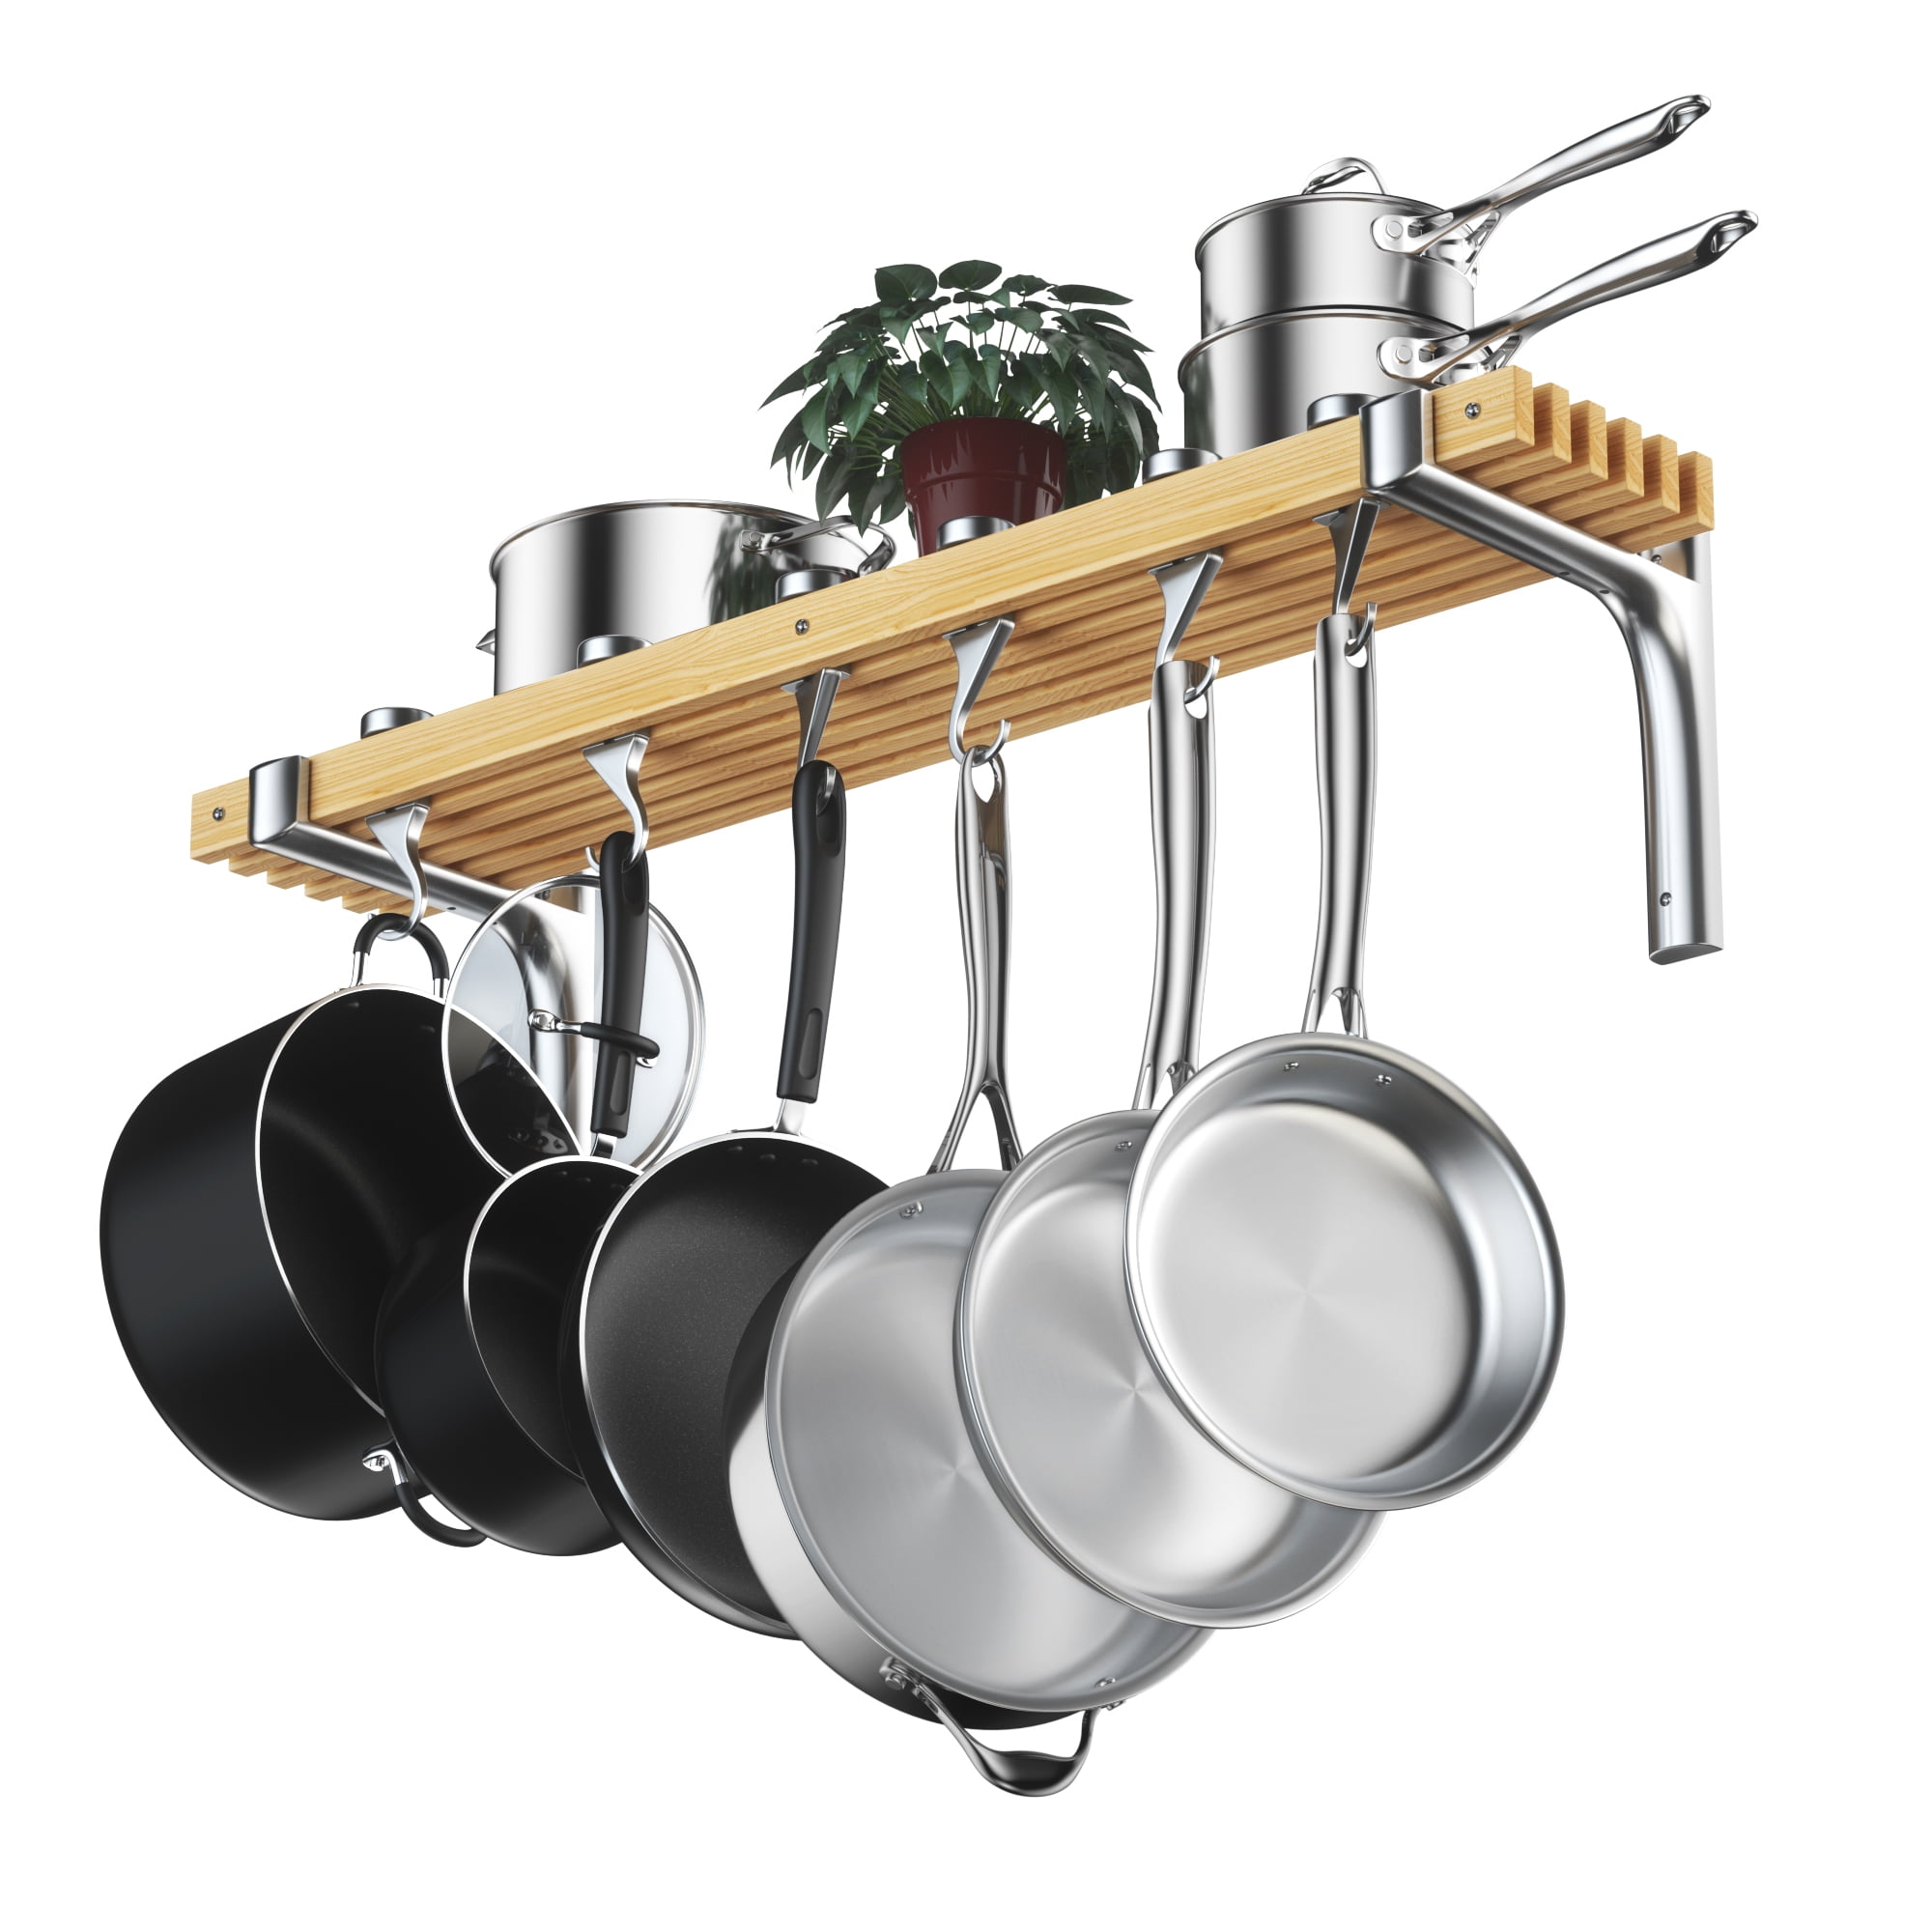 VEVOR Pot Rack Wall Mounted 30 inch Pot and Pan Hanging Rack Pot and Pan Hanger with 12 S Hooks 55 lbs Loading Weight Ideal for Pans Utensils